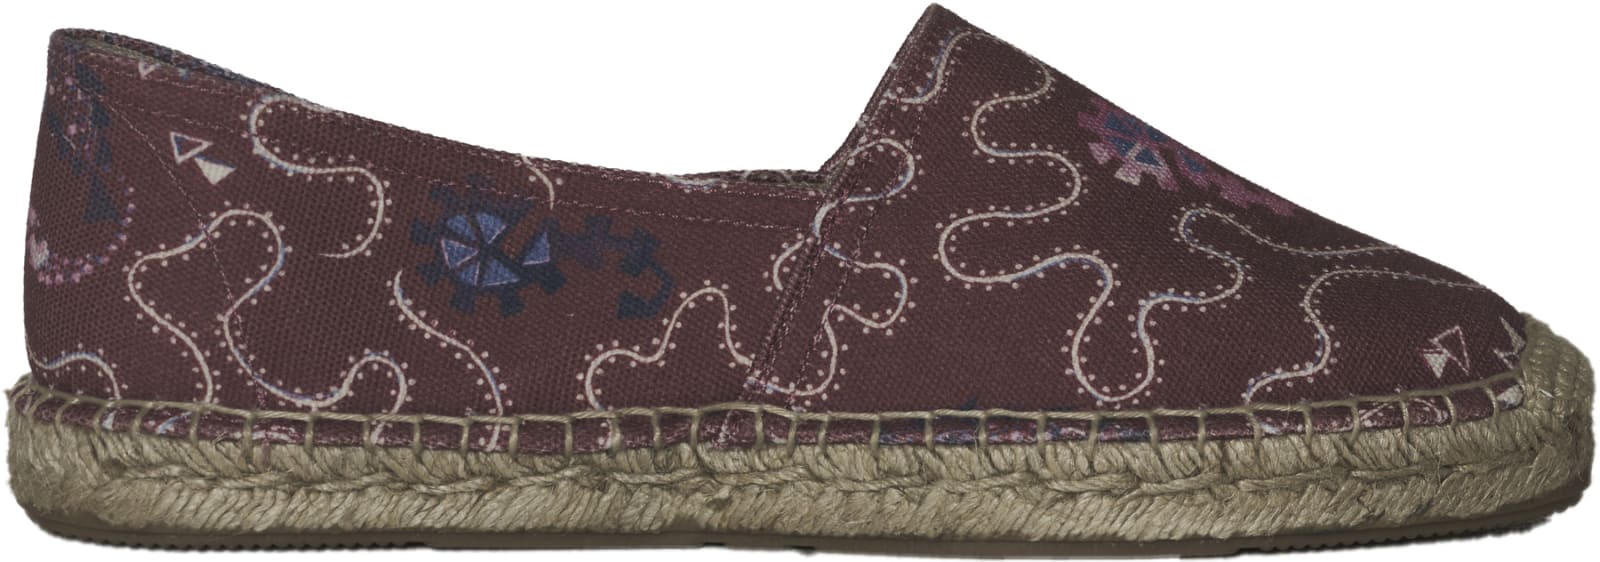 Buy Isabel Marant Canae online, shop Isabel Marant shoes with free shipping